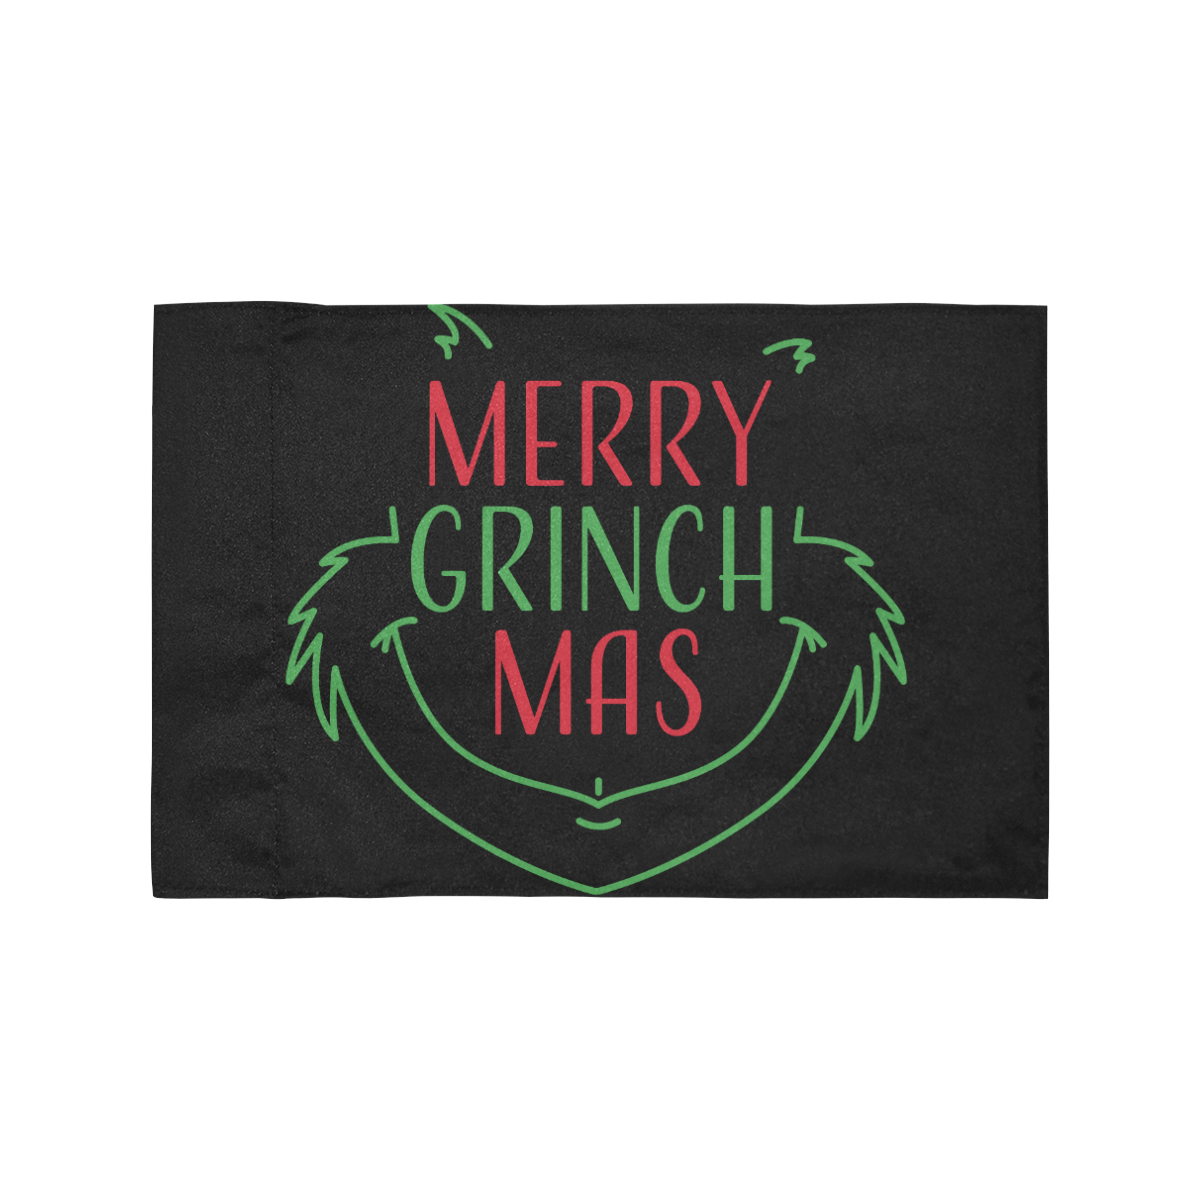 Merry Grinchmas Motorcycle Flag (Twin Sides)